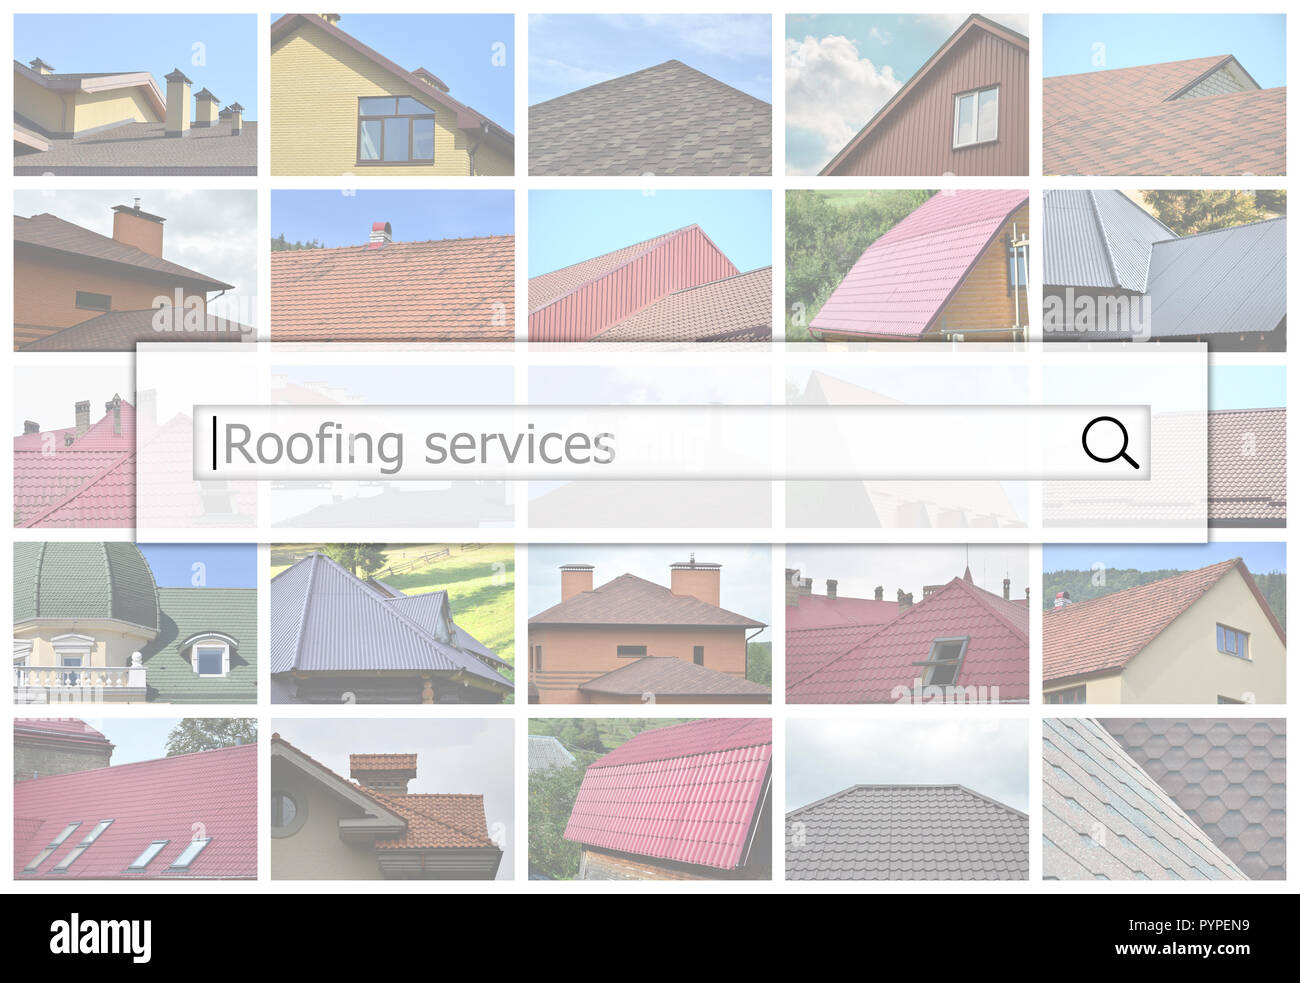 bote tourt roofing
Roofing